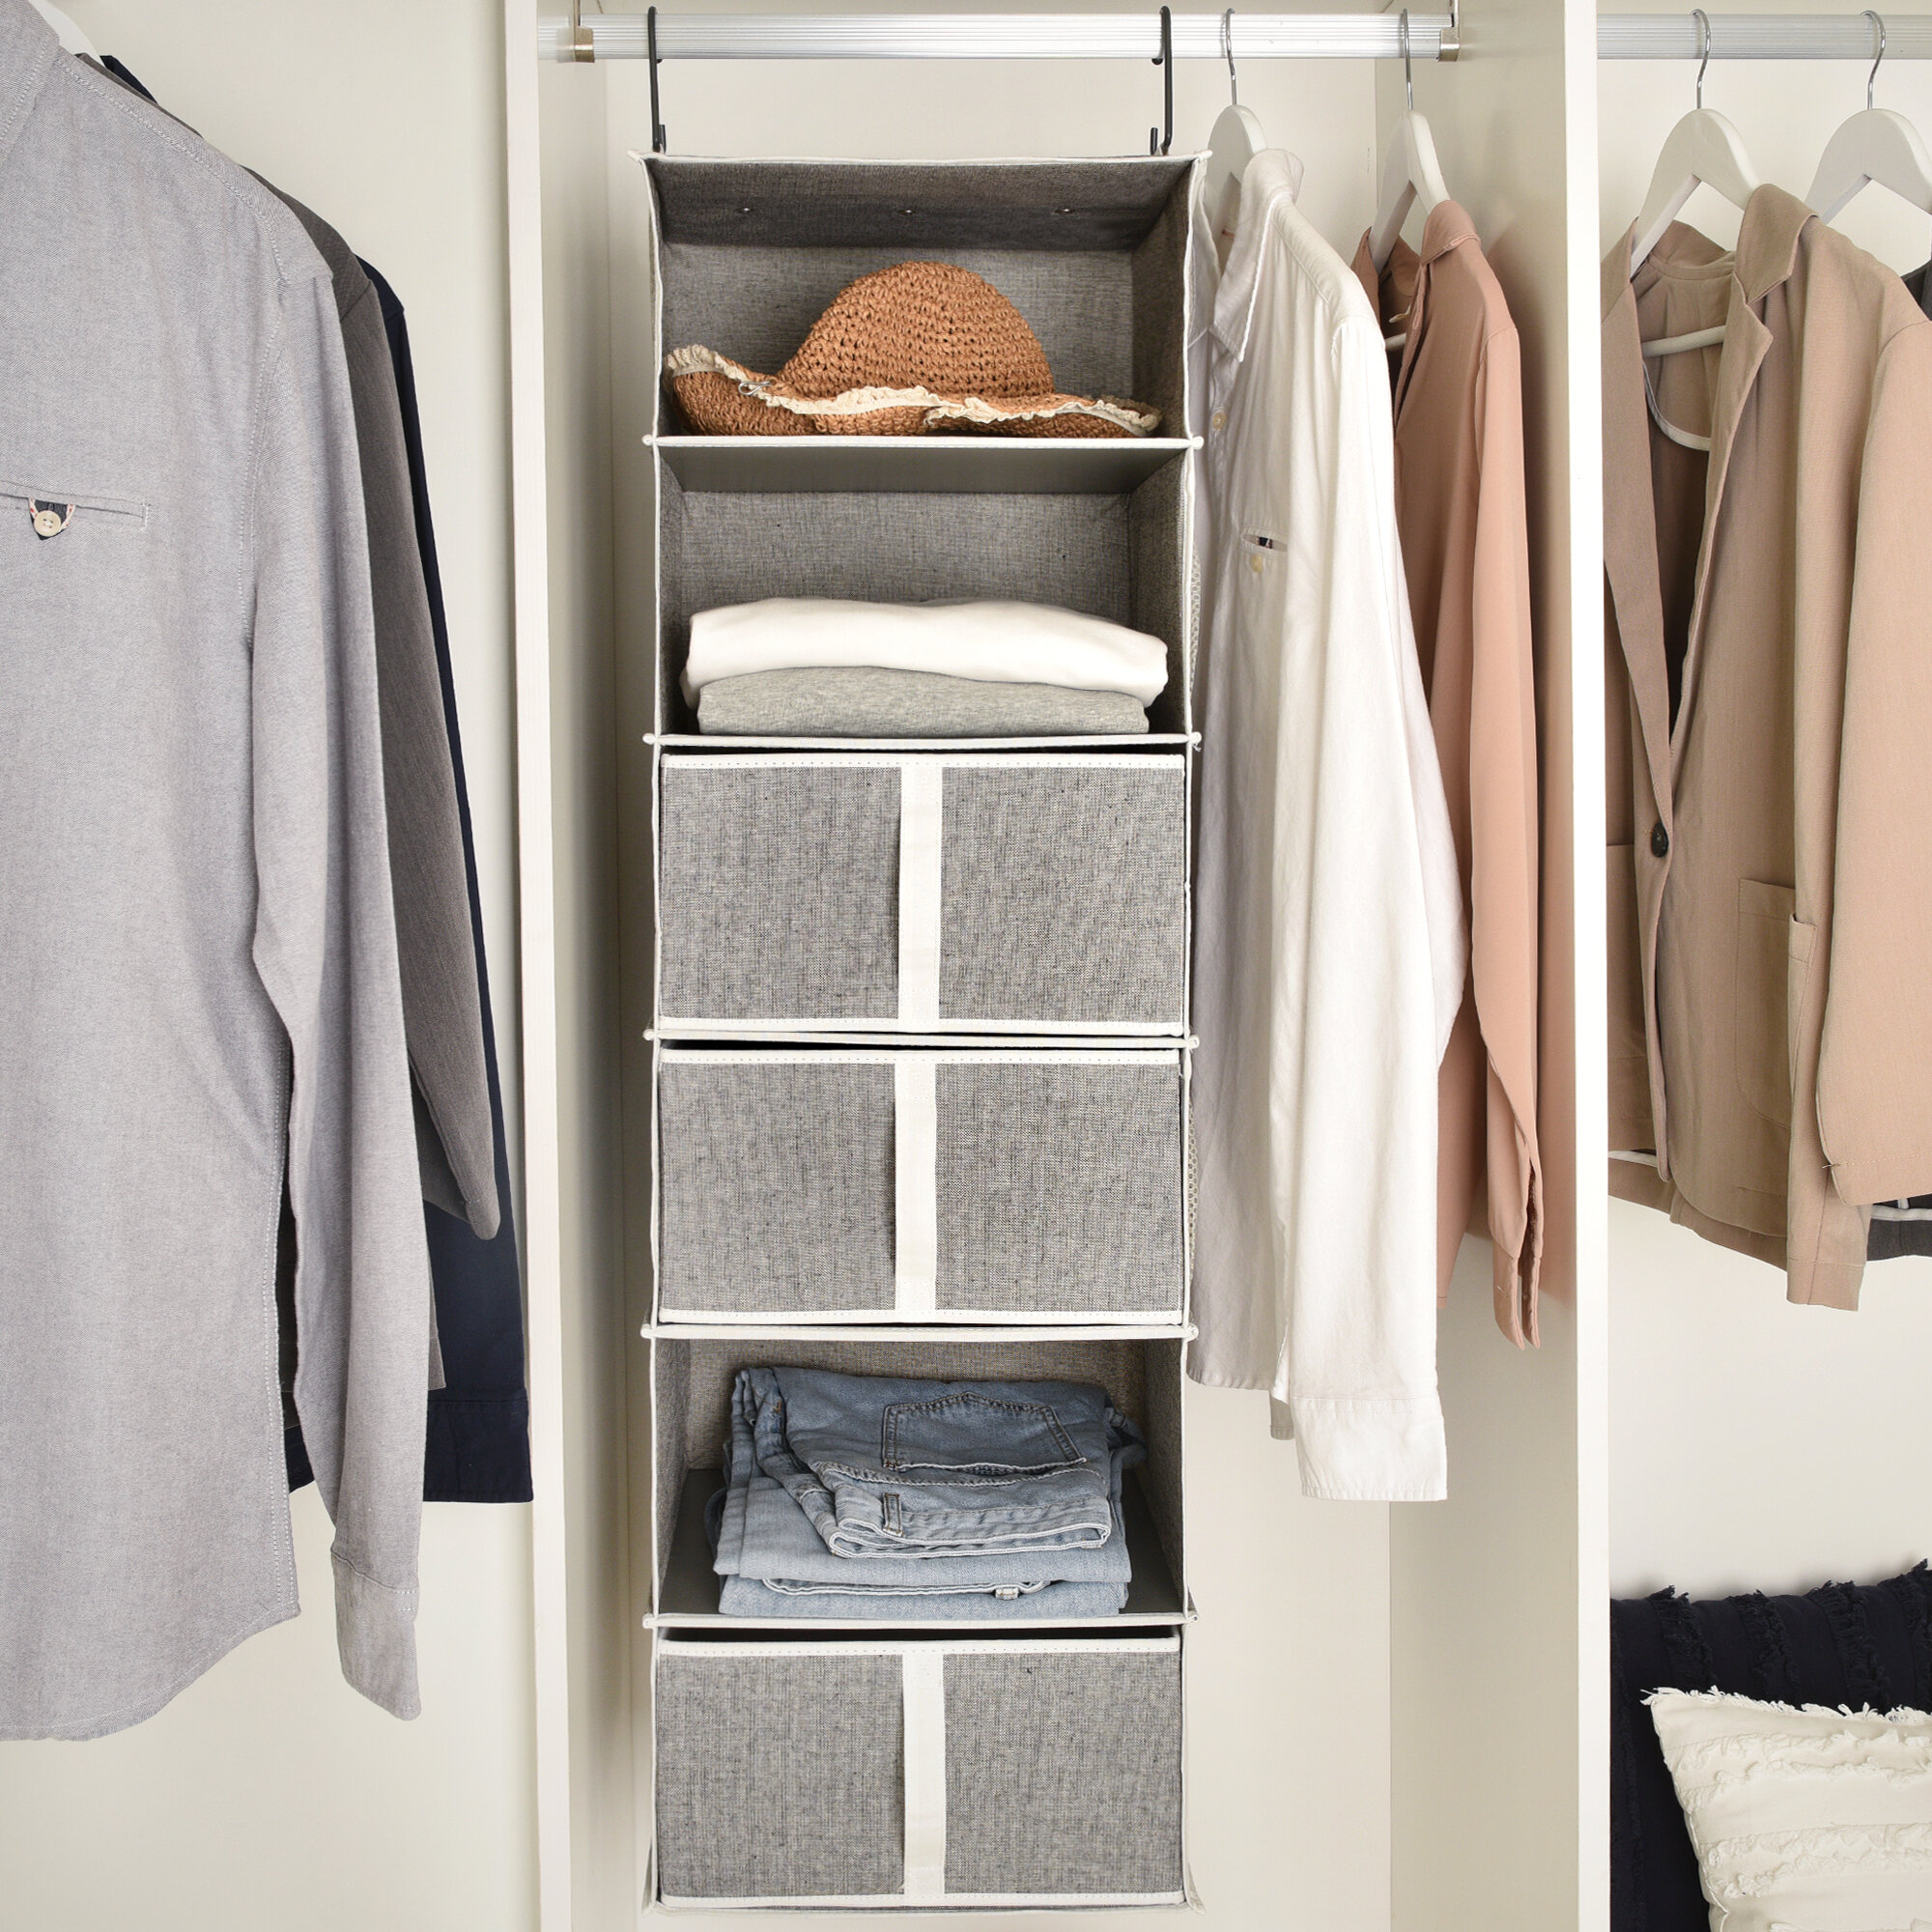 6 Sweater Storage Ideas for Your Closet, Dresser, and More